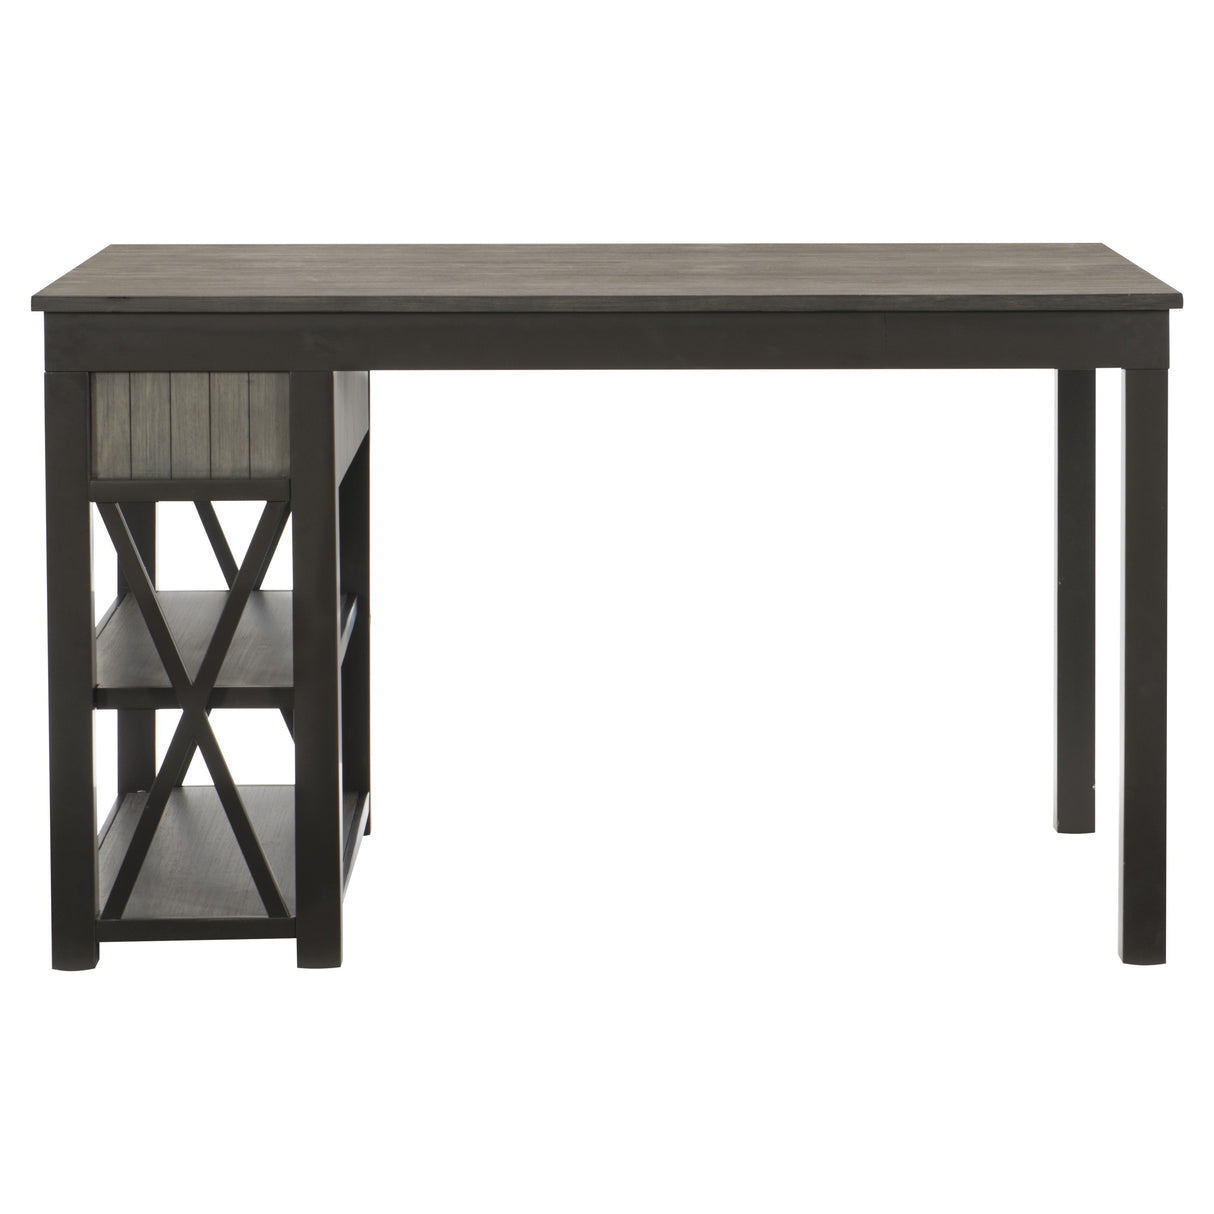 1pc Counter Height Table with Storage Drawers Display Shelf's Gray Gunmetal Finish Casual Style Dining Furniture - Home Elegance USA